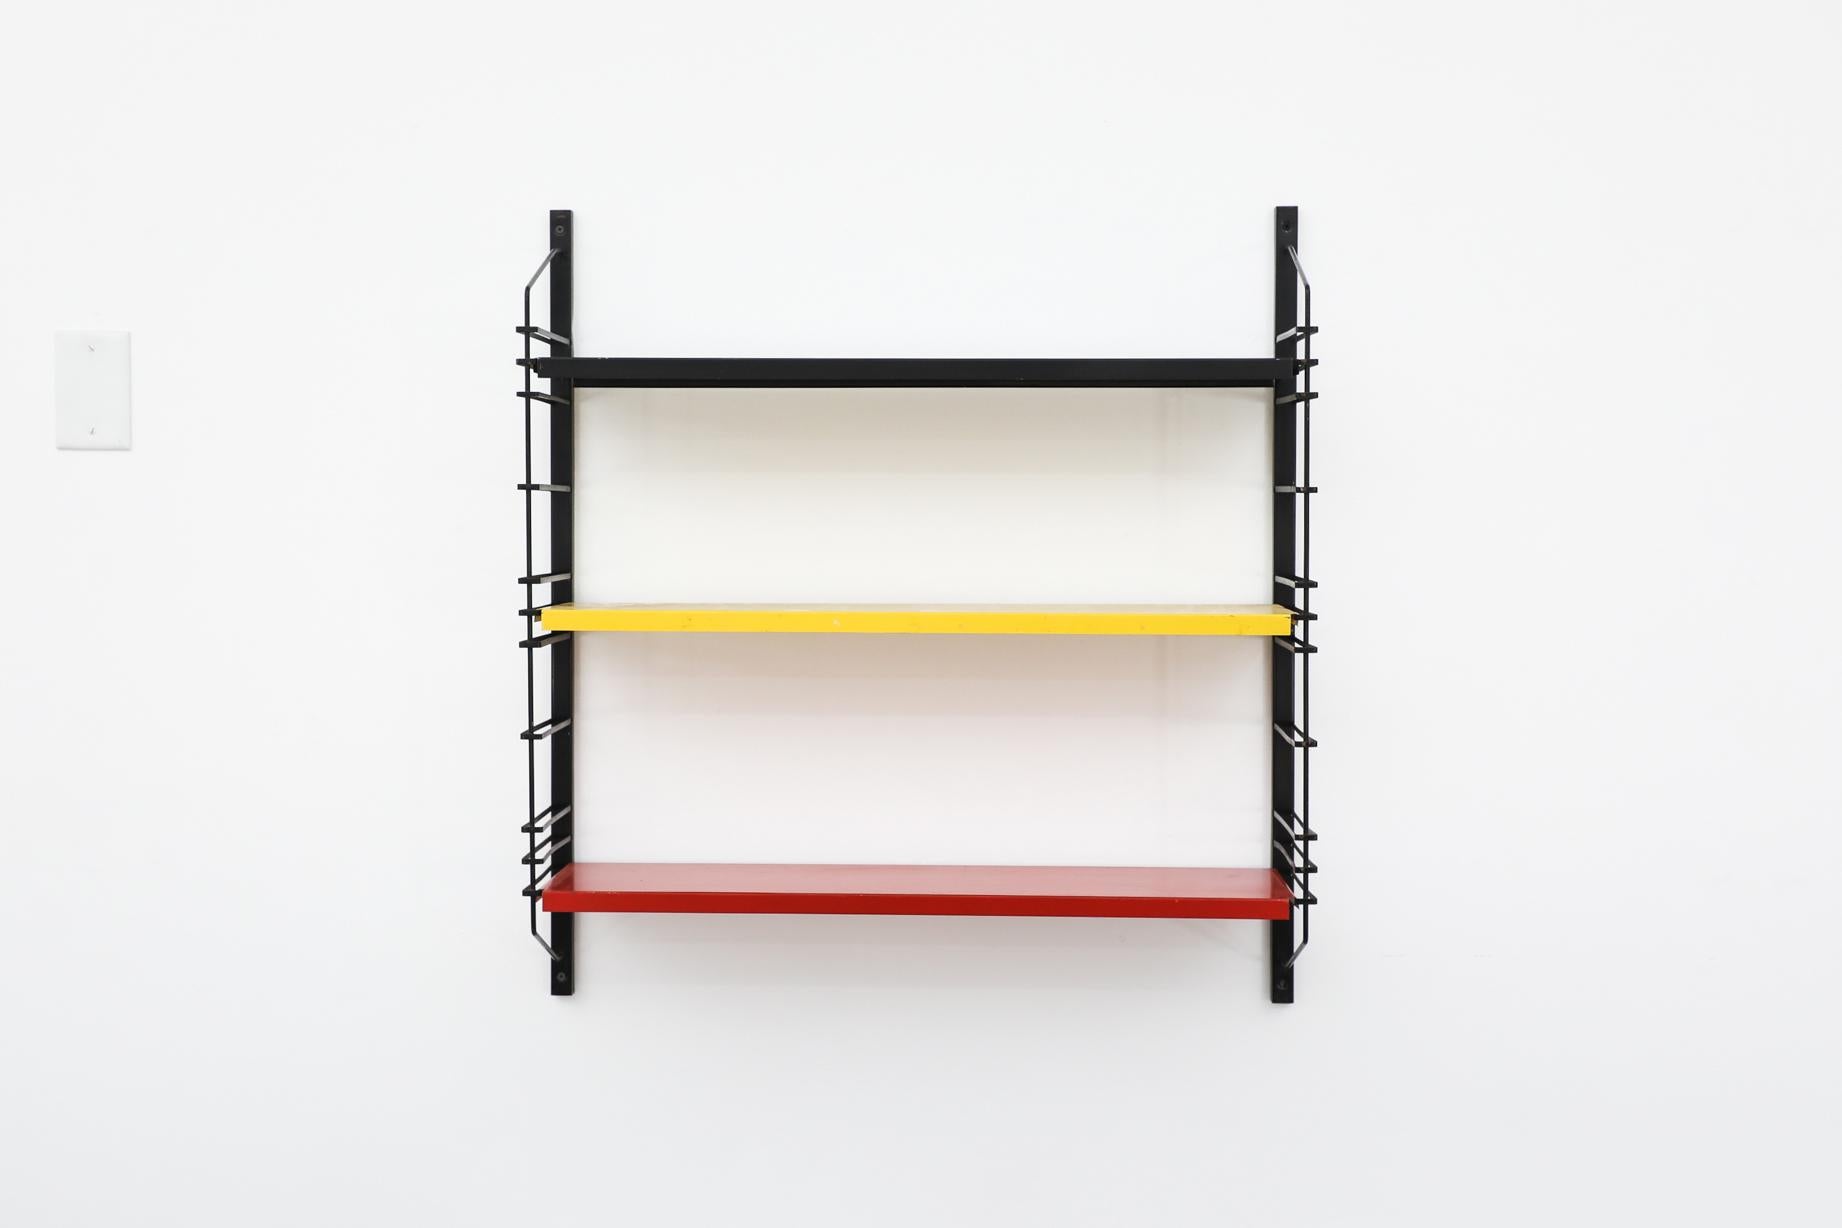 Mid-Century Drentea Emmen industrial shelving with black, yellow and red shelves on black enameled metal wire risers. The shelves rest on the wire risers and can be arranged to different positions. In original condition with visible wear and